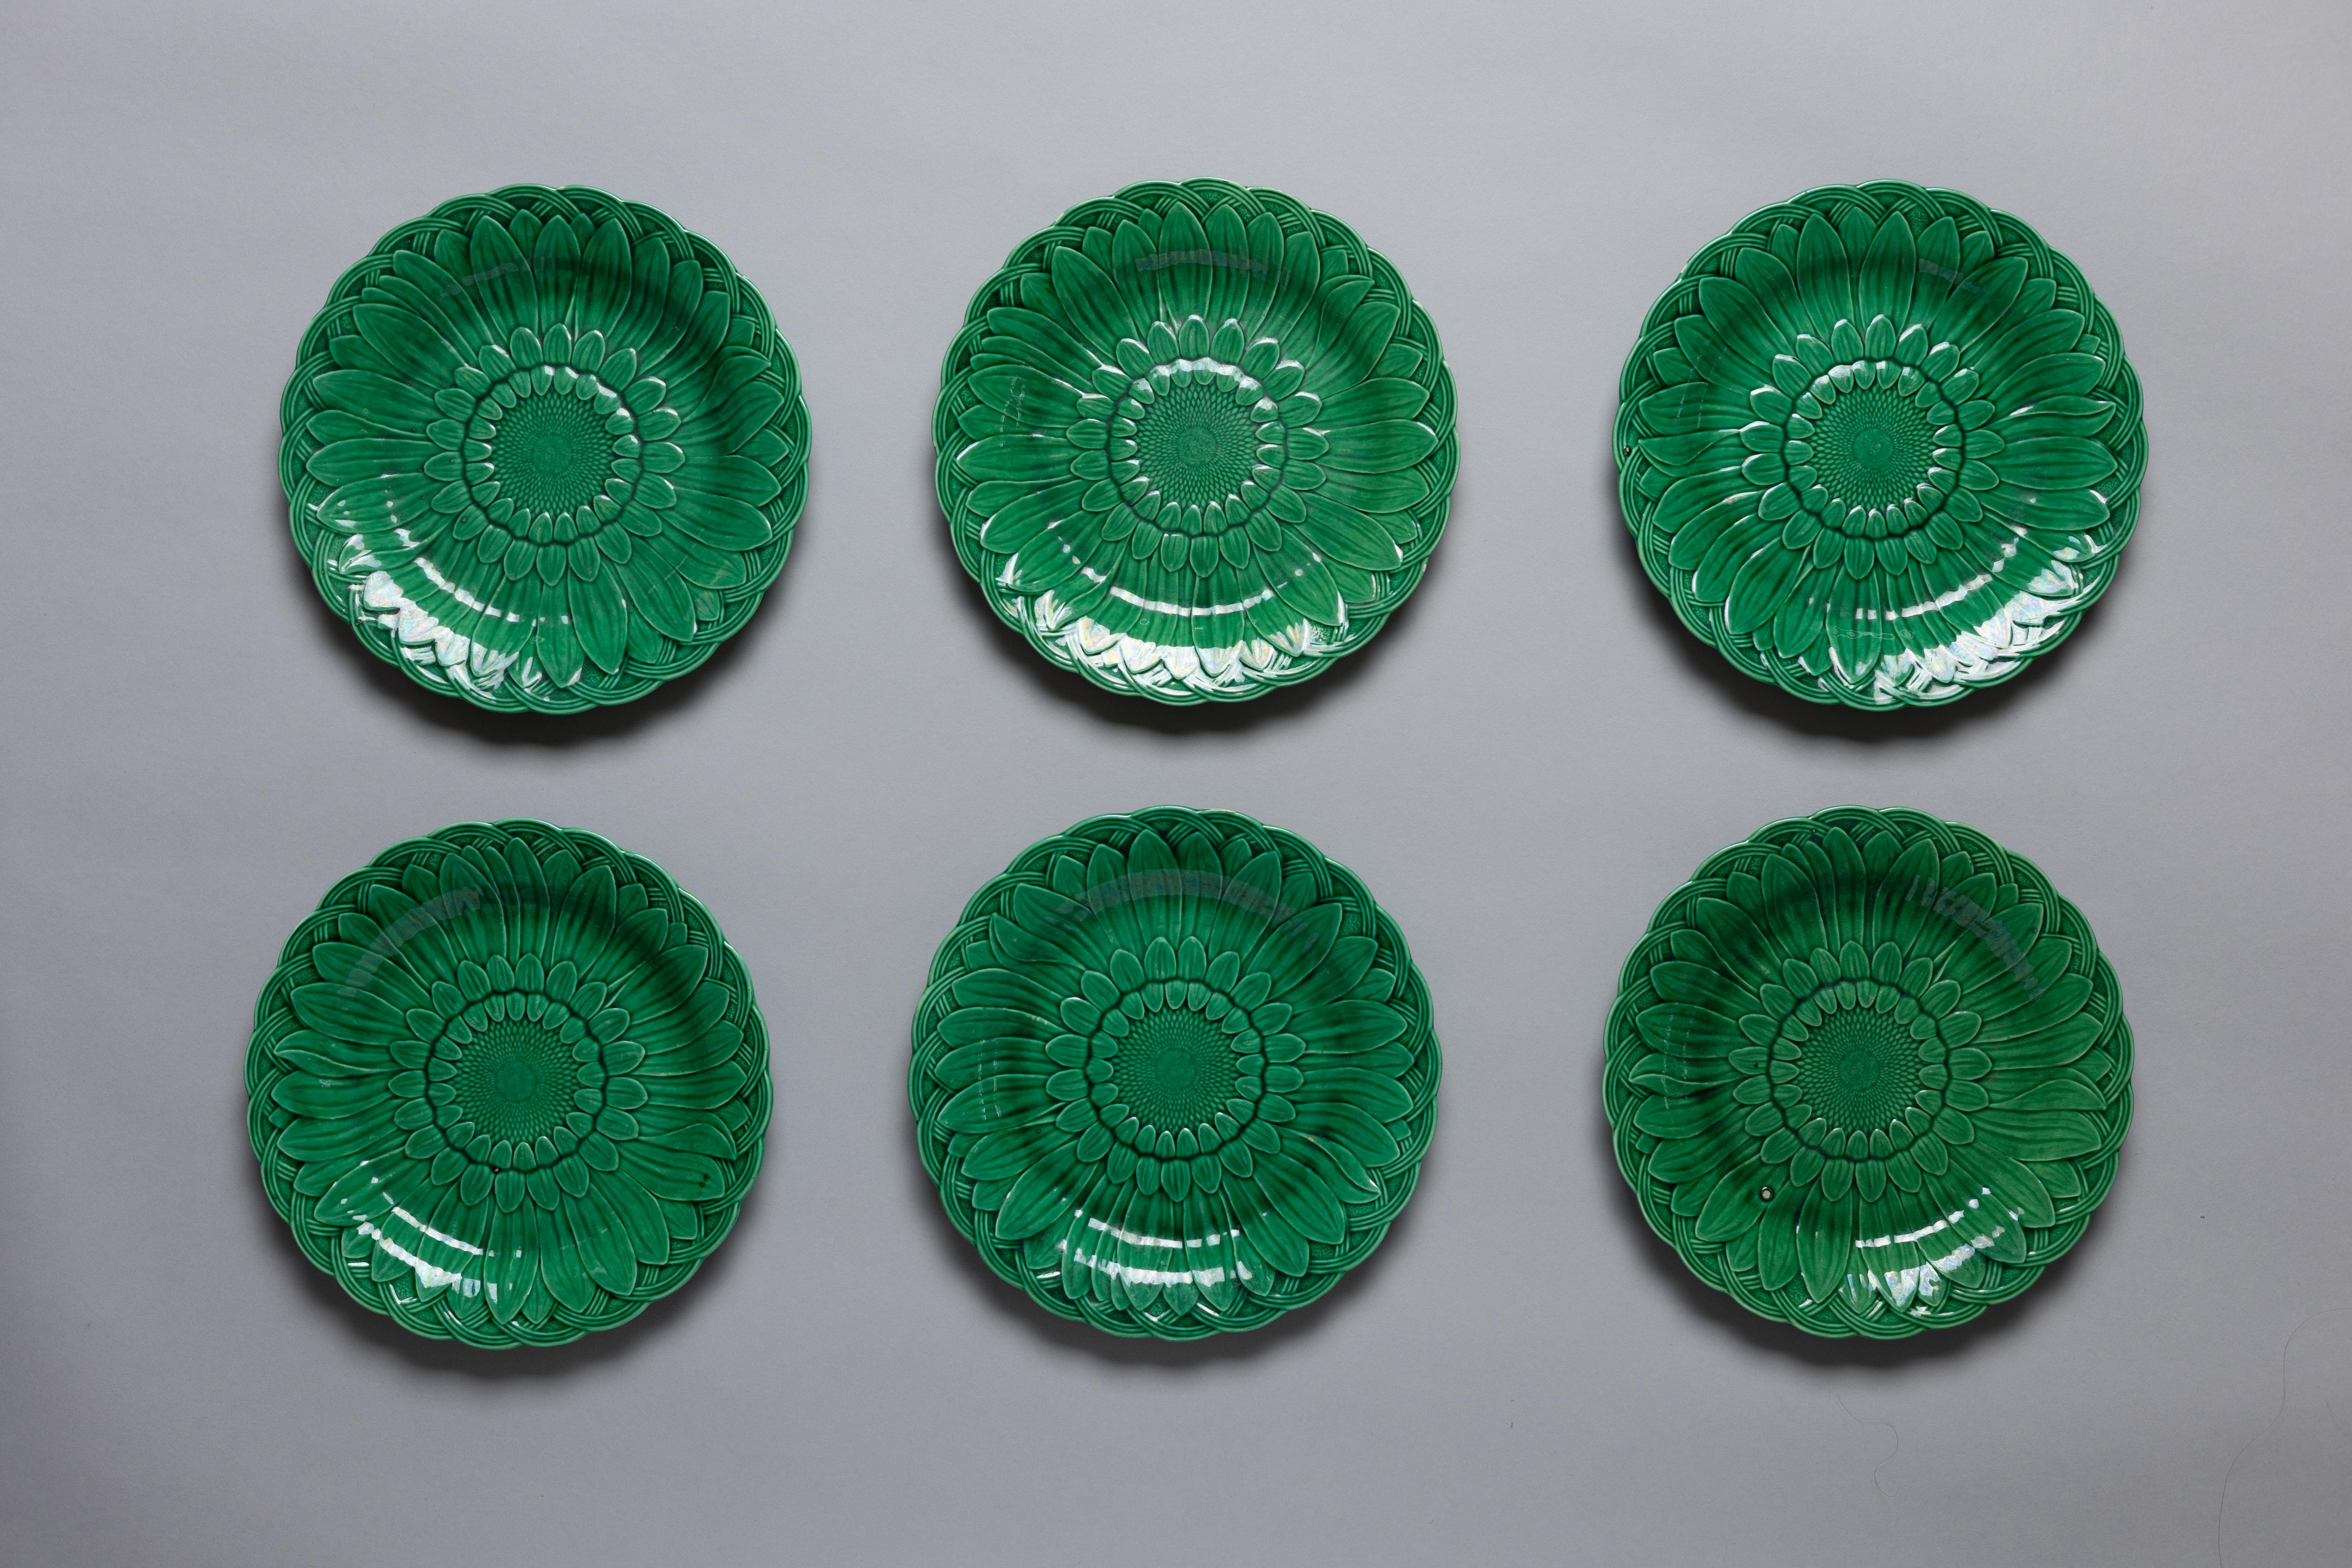 Set of 14 green majolica glazed dinner plates in the ‘Sunflower’ pattern by Wedgwood, made circa 1880.

The sunflower, alongside the calla lily and peacock feather, became an emblem of the late nineteenth-century Aesthetic Movement. Oscar Wilde